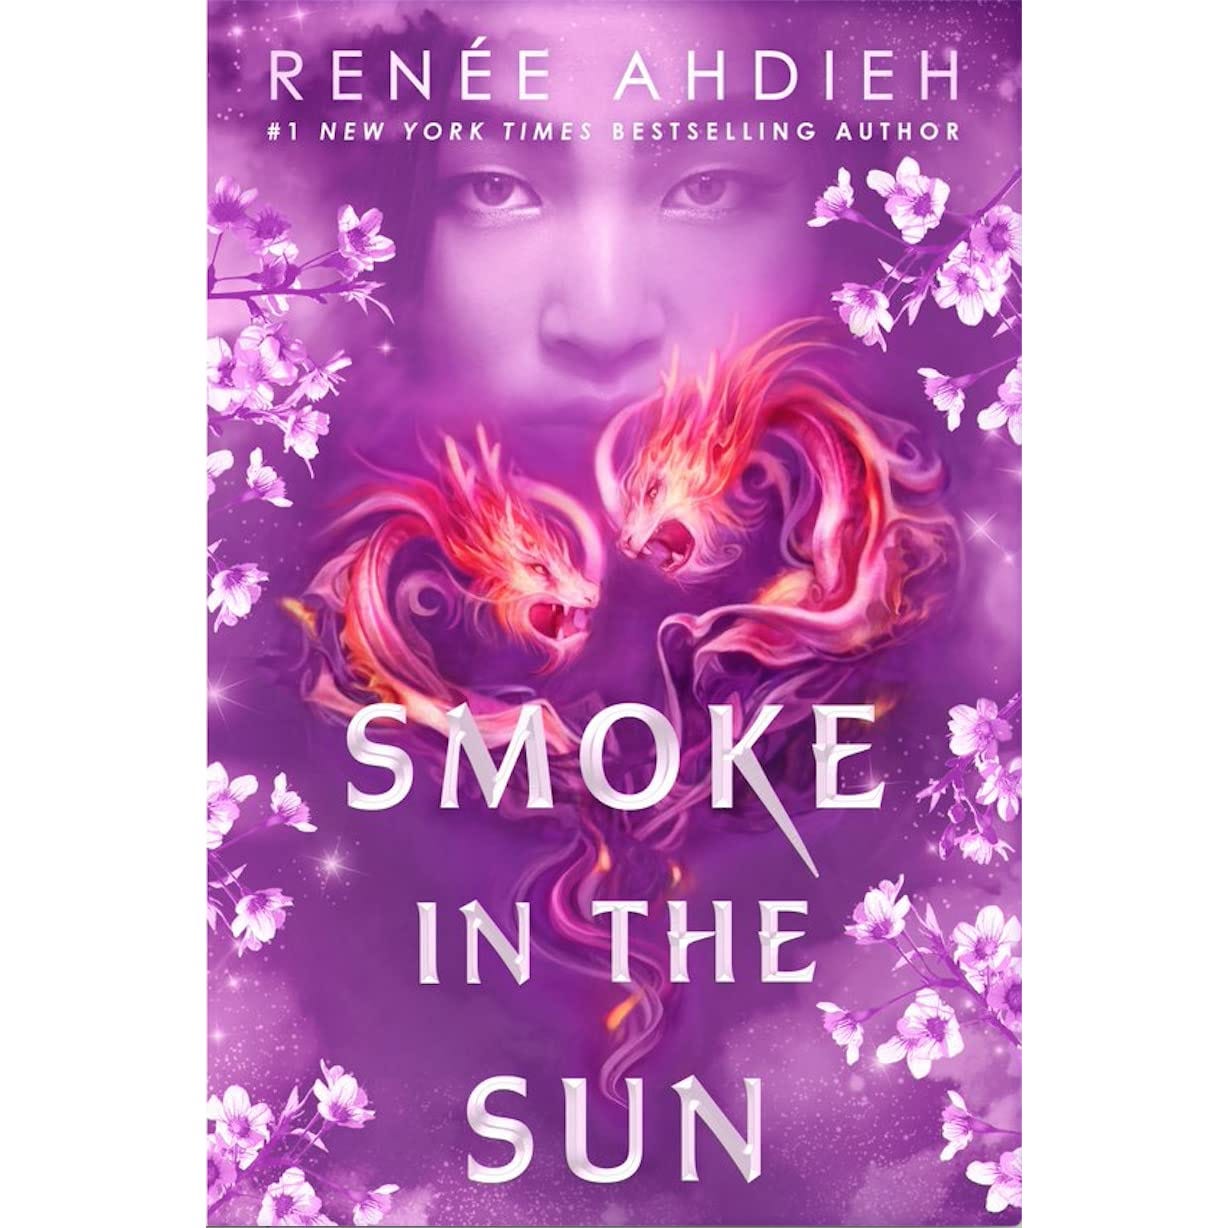 Image result for smoke in the sun cover renee ahdieh